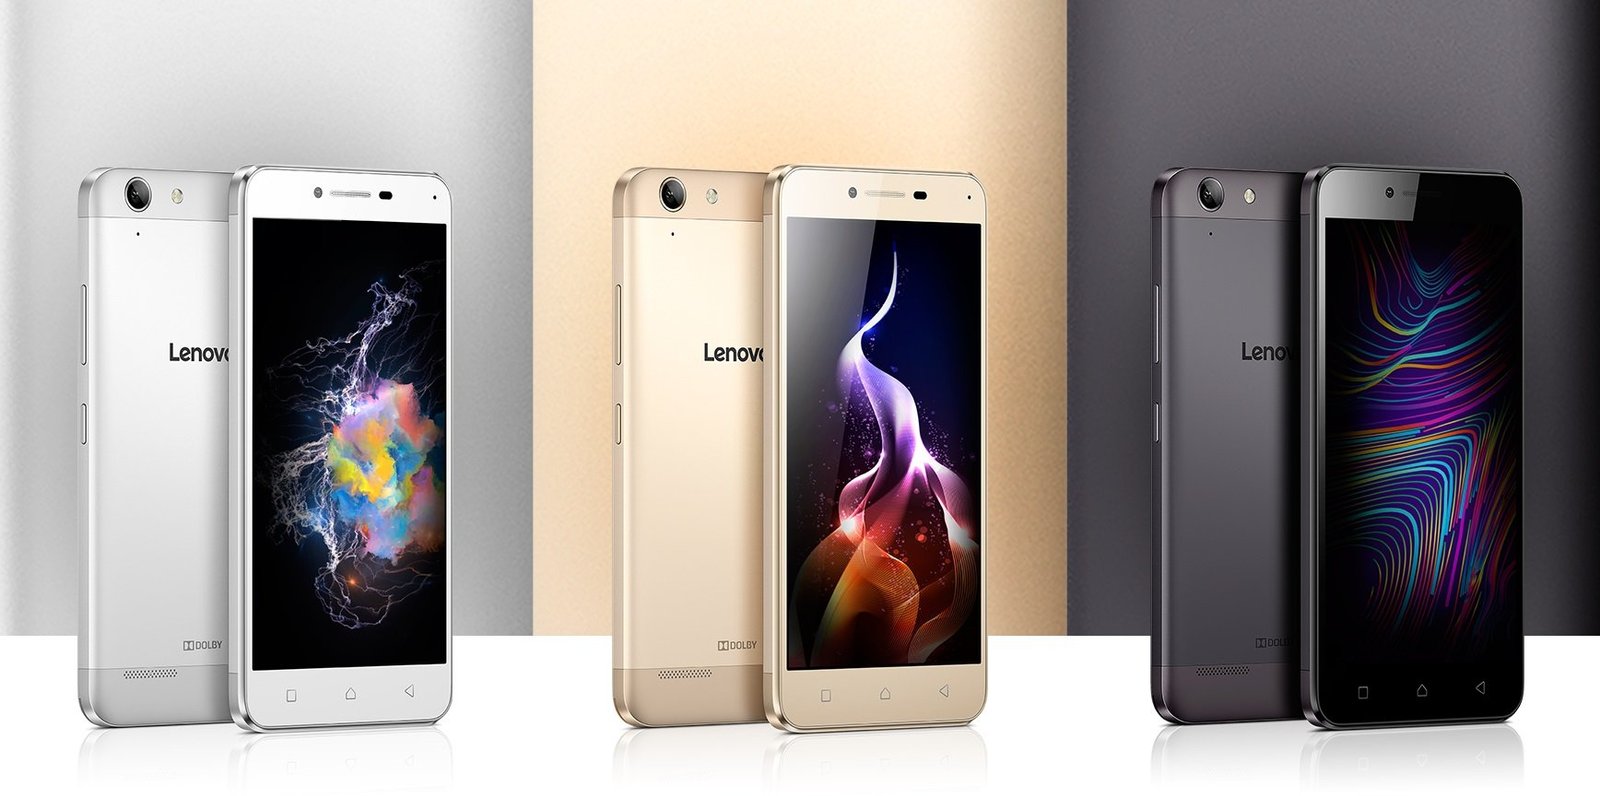 lenovo-vibe-k5-plus-price-specifications-availability-india-23rd-march